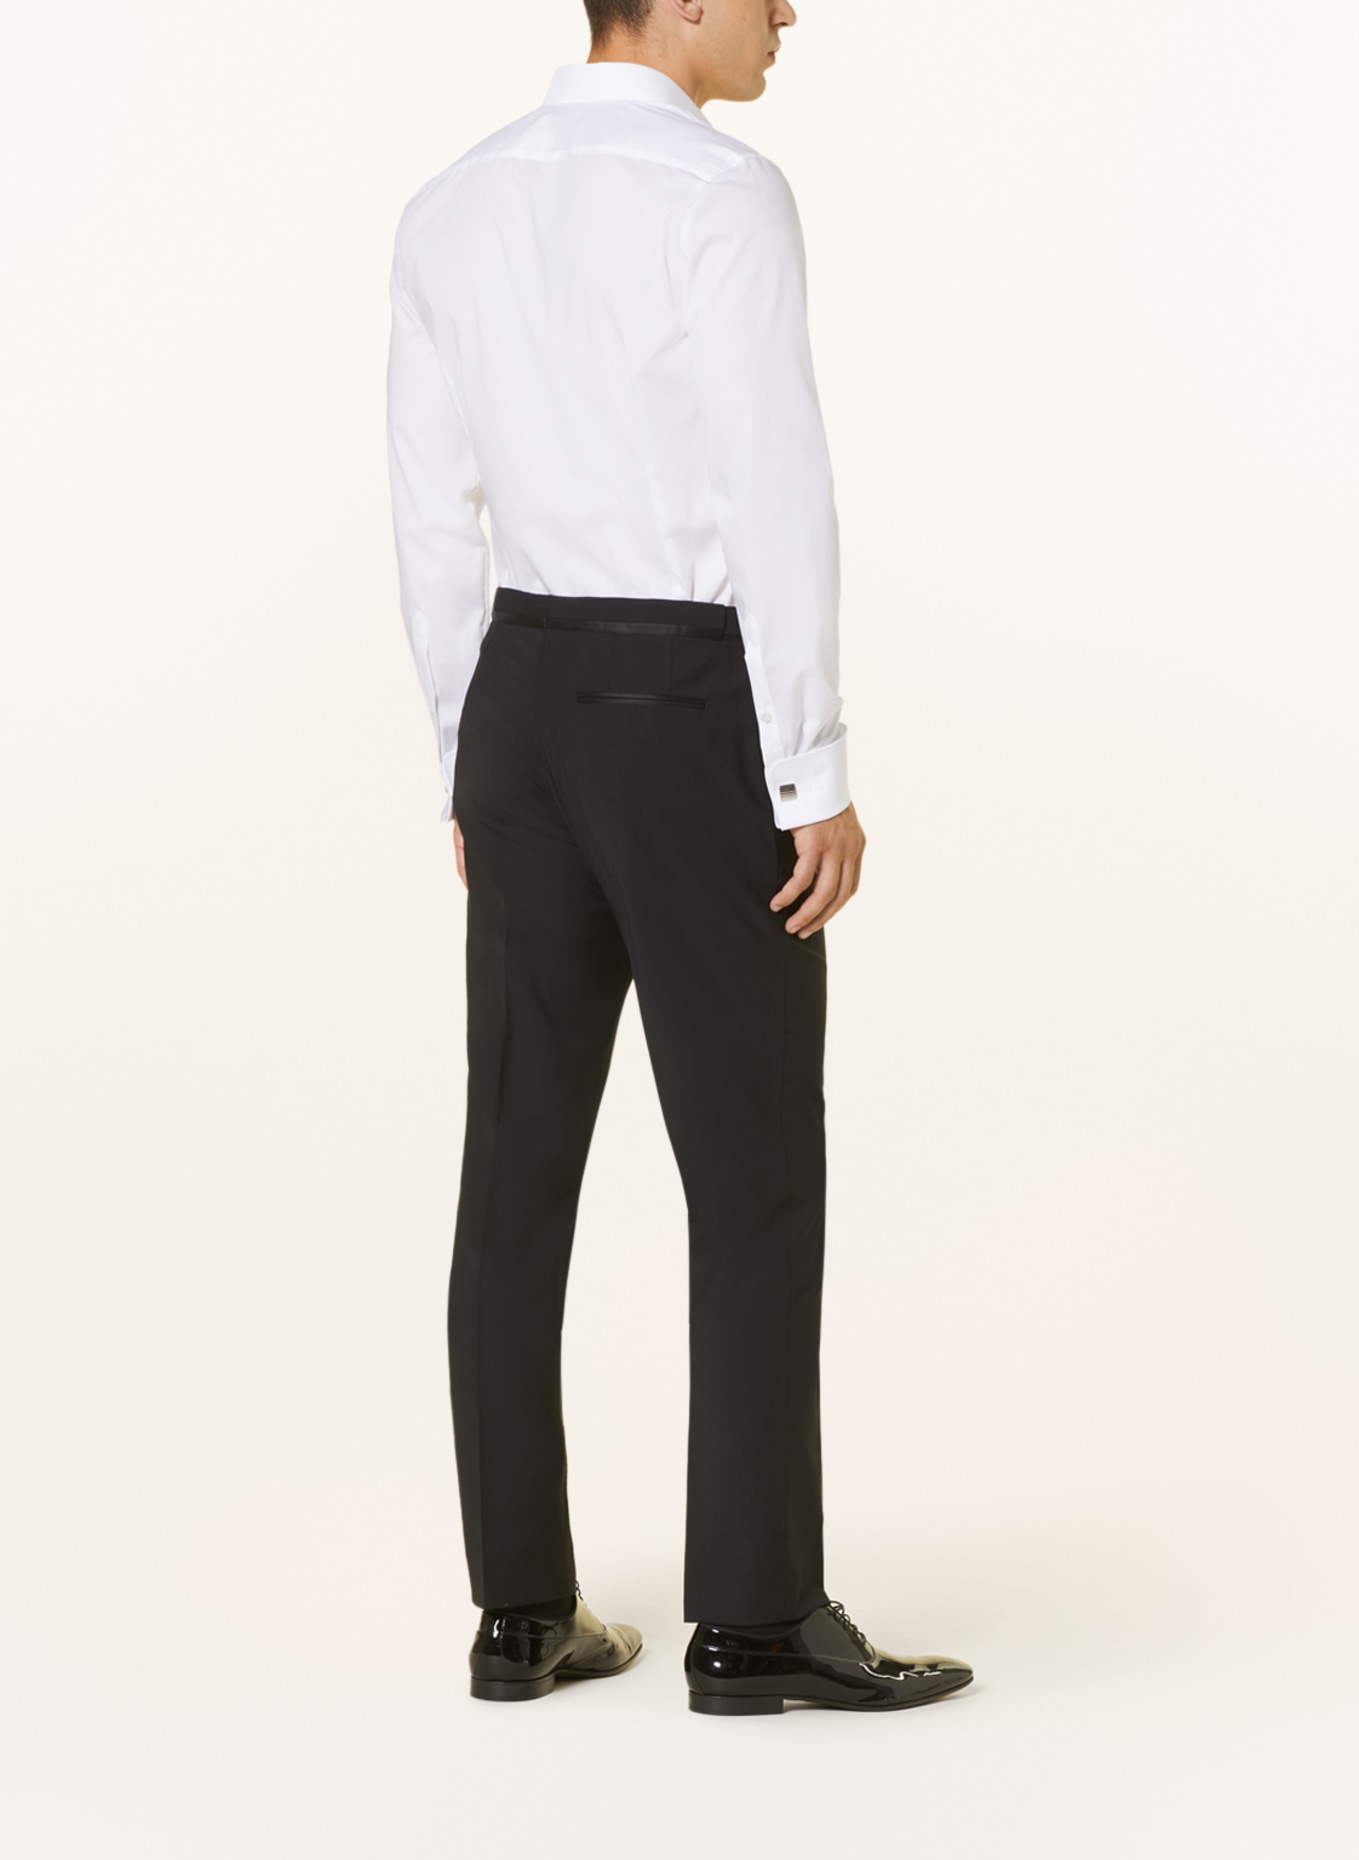 Classic Collection Double Pleated White Pants